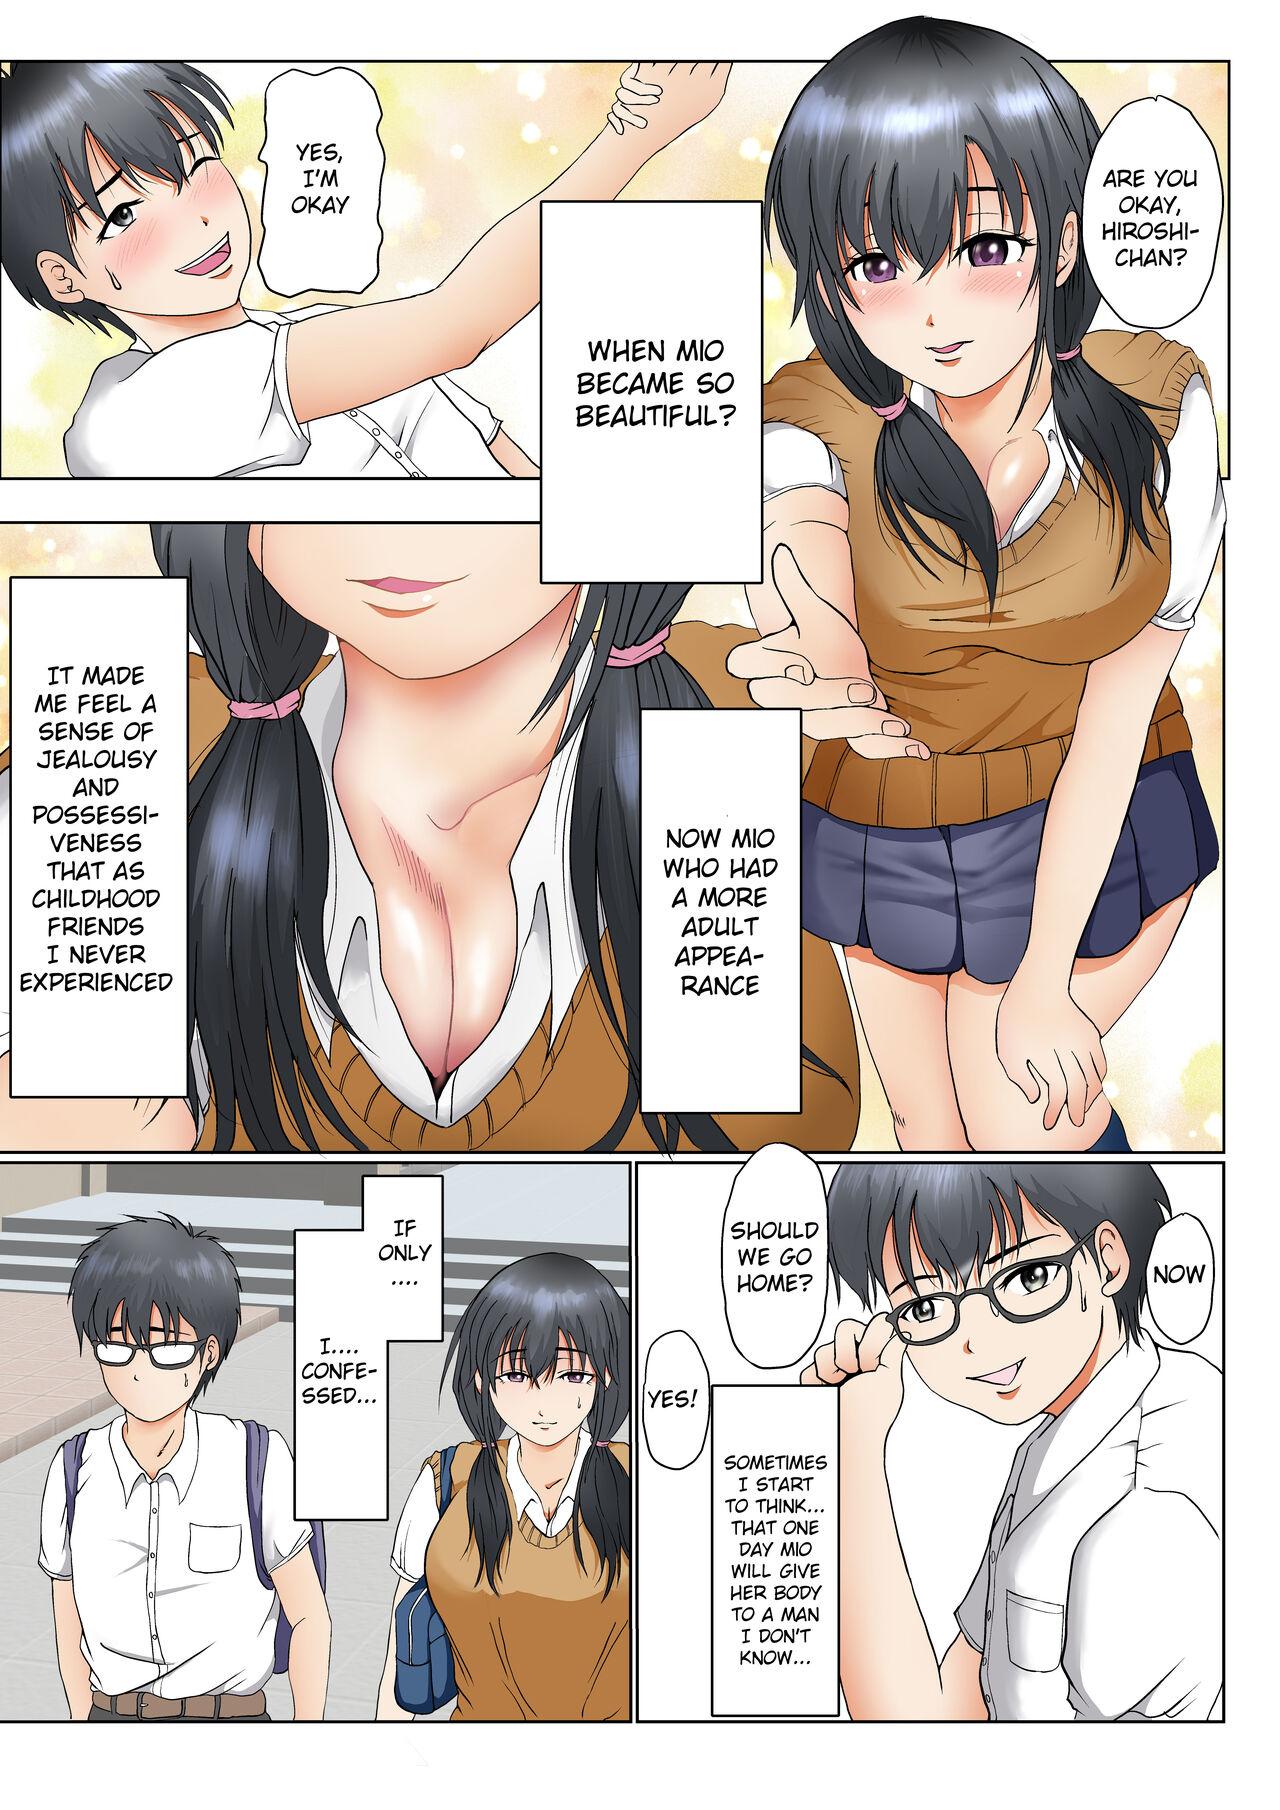 Yanks Featured The reason why the bond with my childhood friend is broken so easily - Original Tanned - Page 10